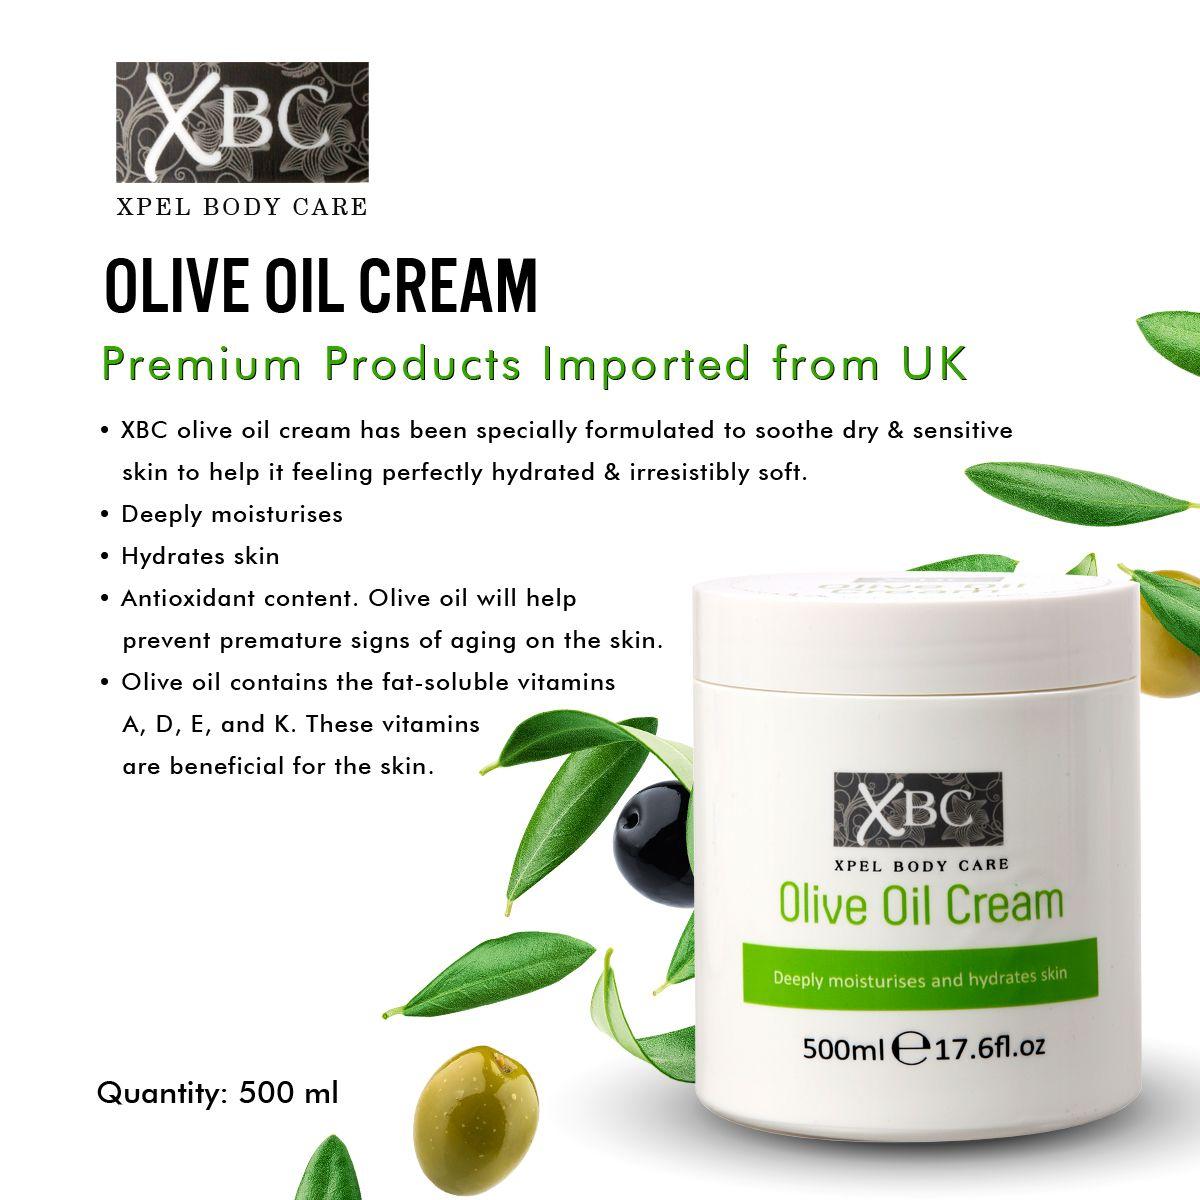 Xpel Marketing Olive Oil Cream Deeply Moisturises and Hydrates Skin for Women & Men with Dry Skin for All Seasons, Soothes, Softens & Moisturises Skin 500 ml